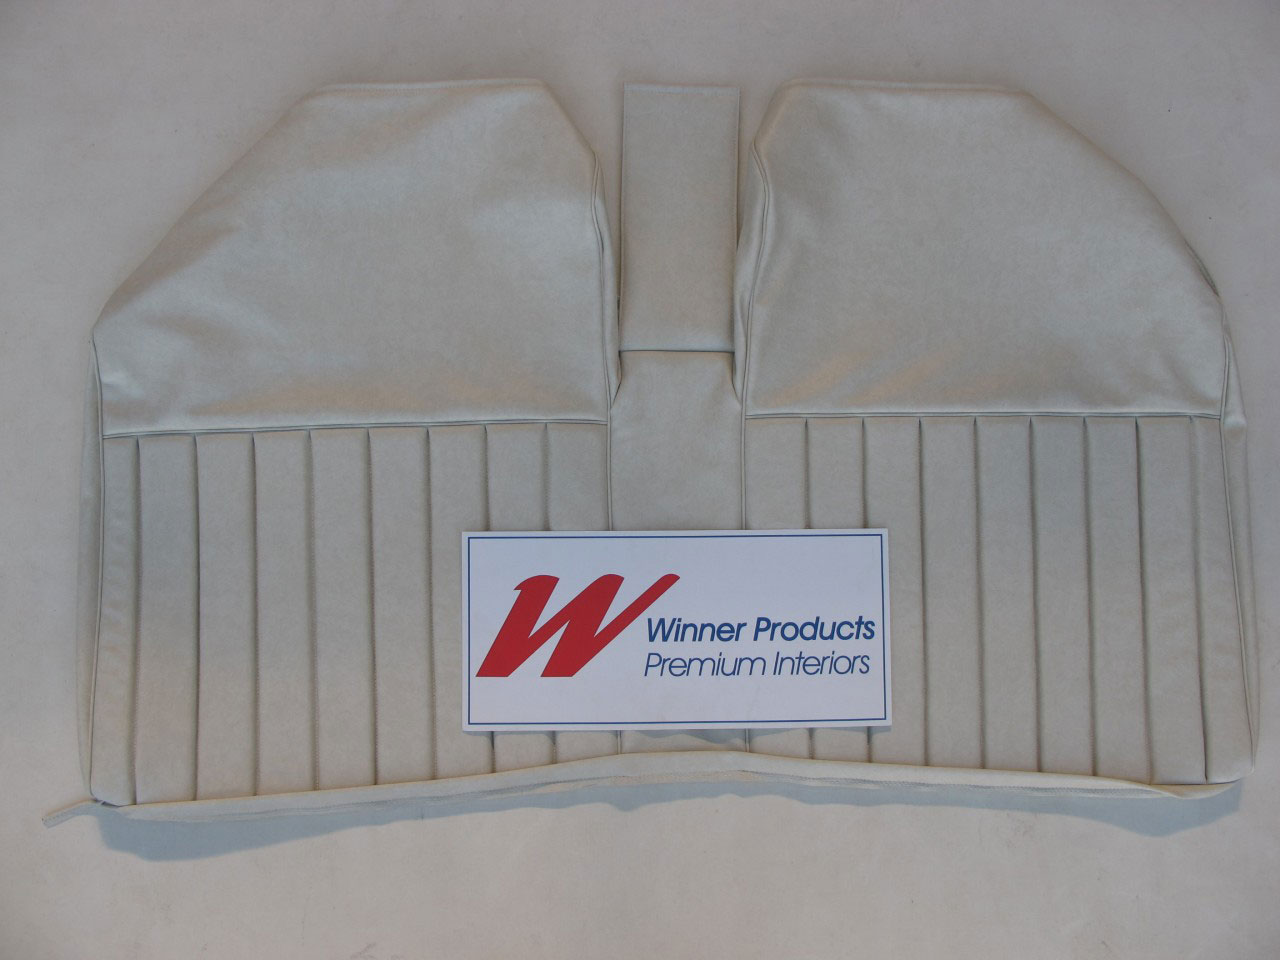 Holden Monaro HQ Monaro LS Coupe 1971 18R Flax Seat Covers (Image 5 of 8)